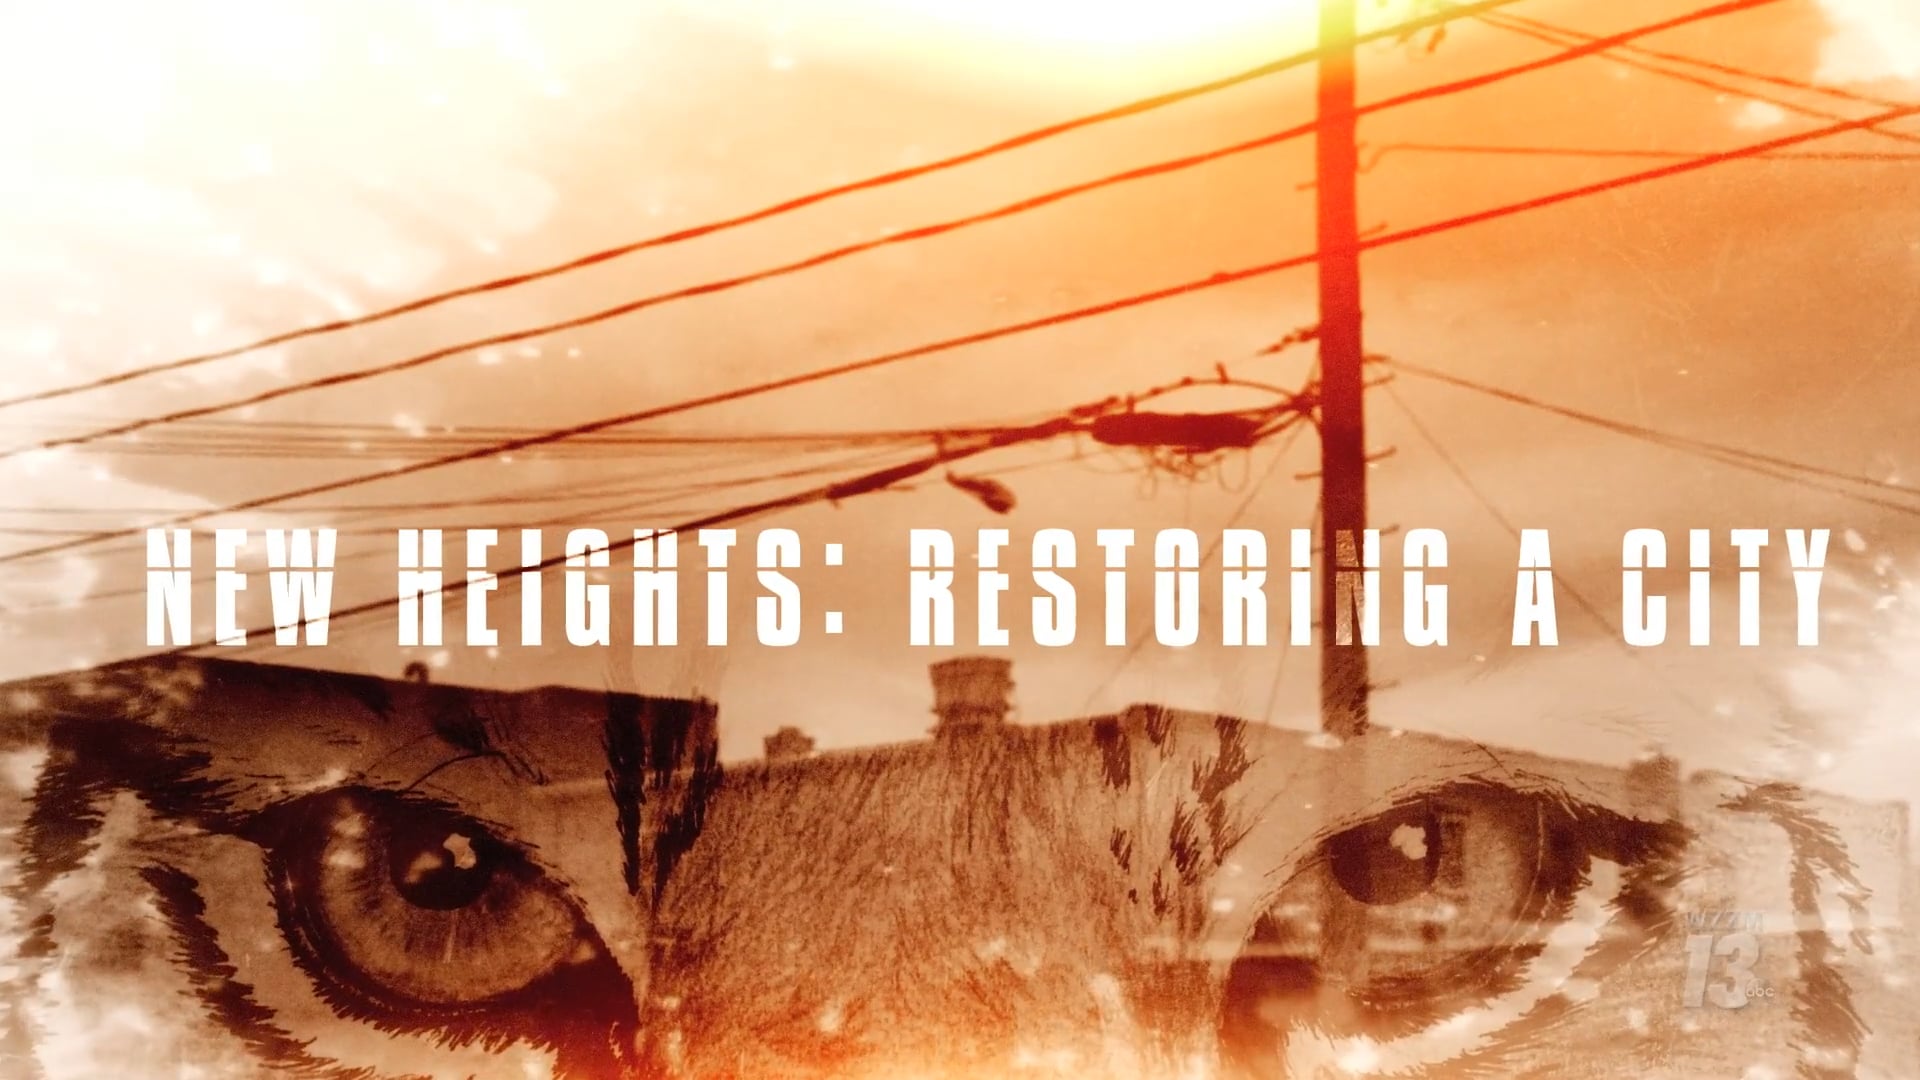 New Heights: Restoring A City